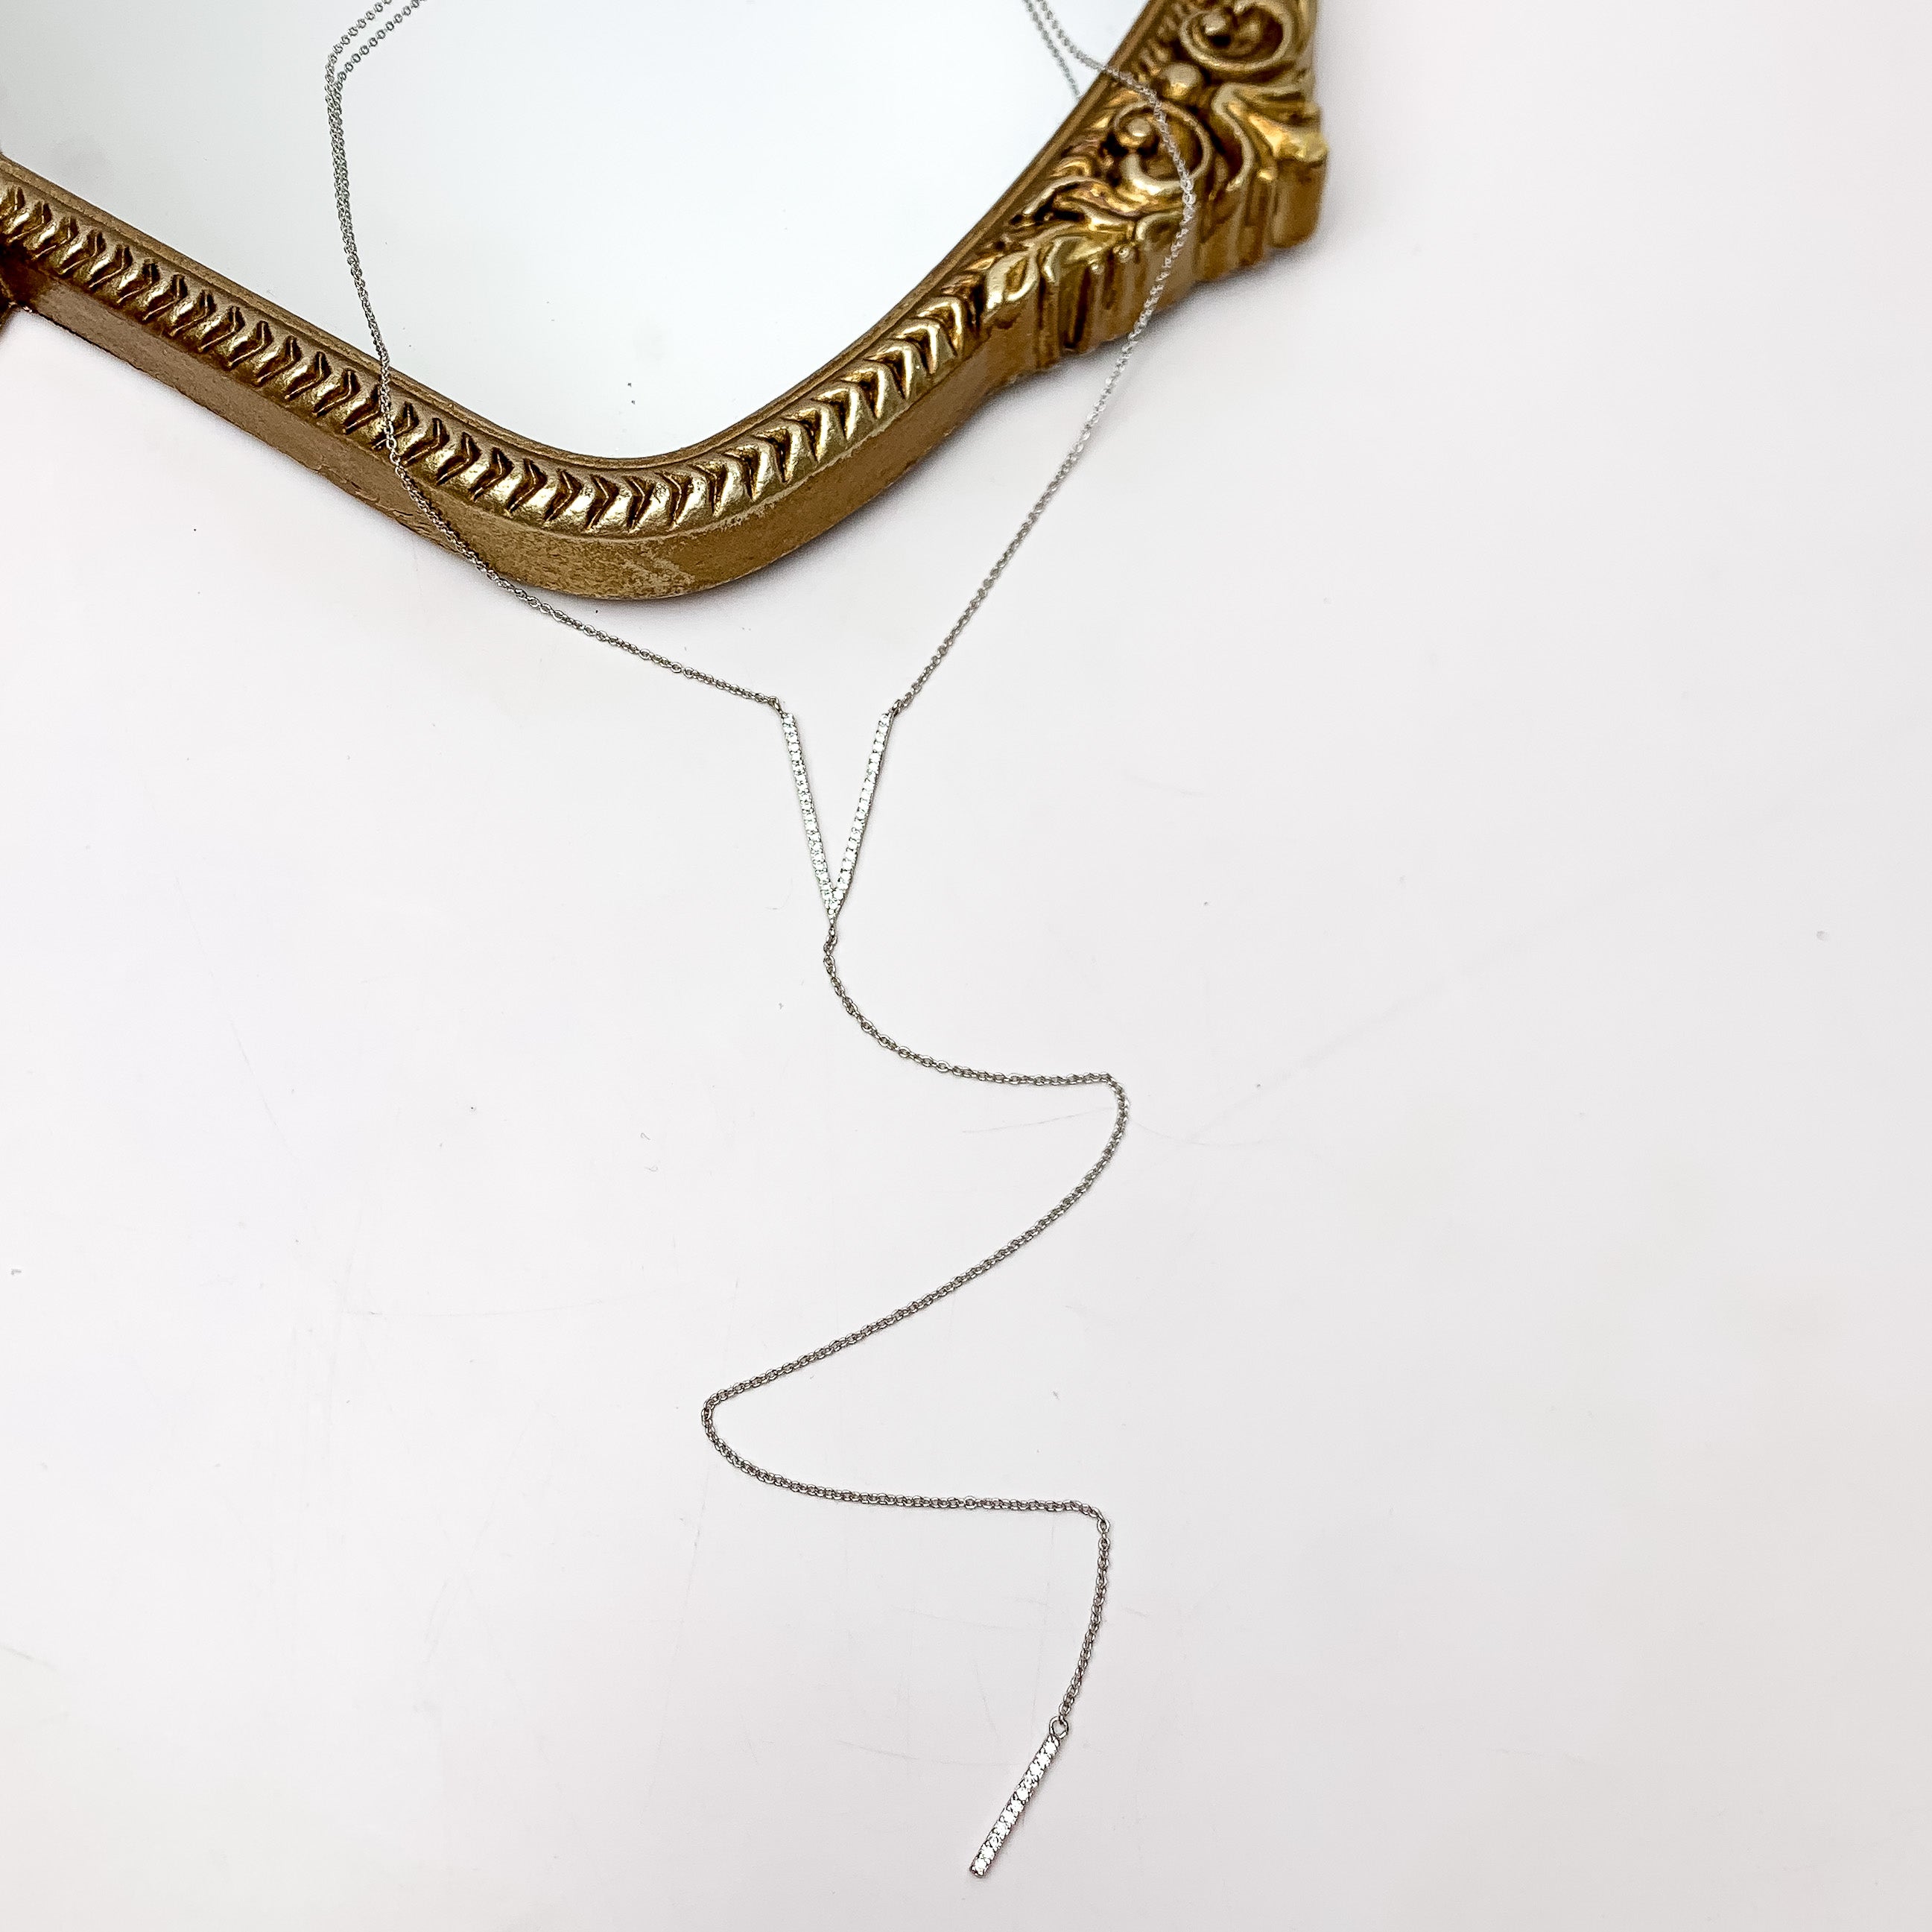 Here For It Silver Tone Y Necklace With Clear Crystals. This necklace is pictured on a white background with part of it on a gold trimmed mirror.